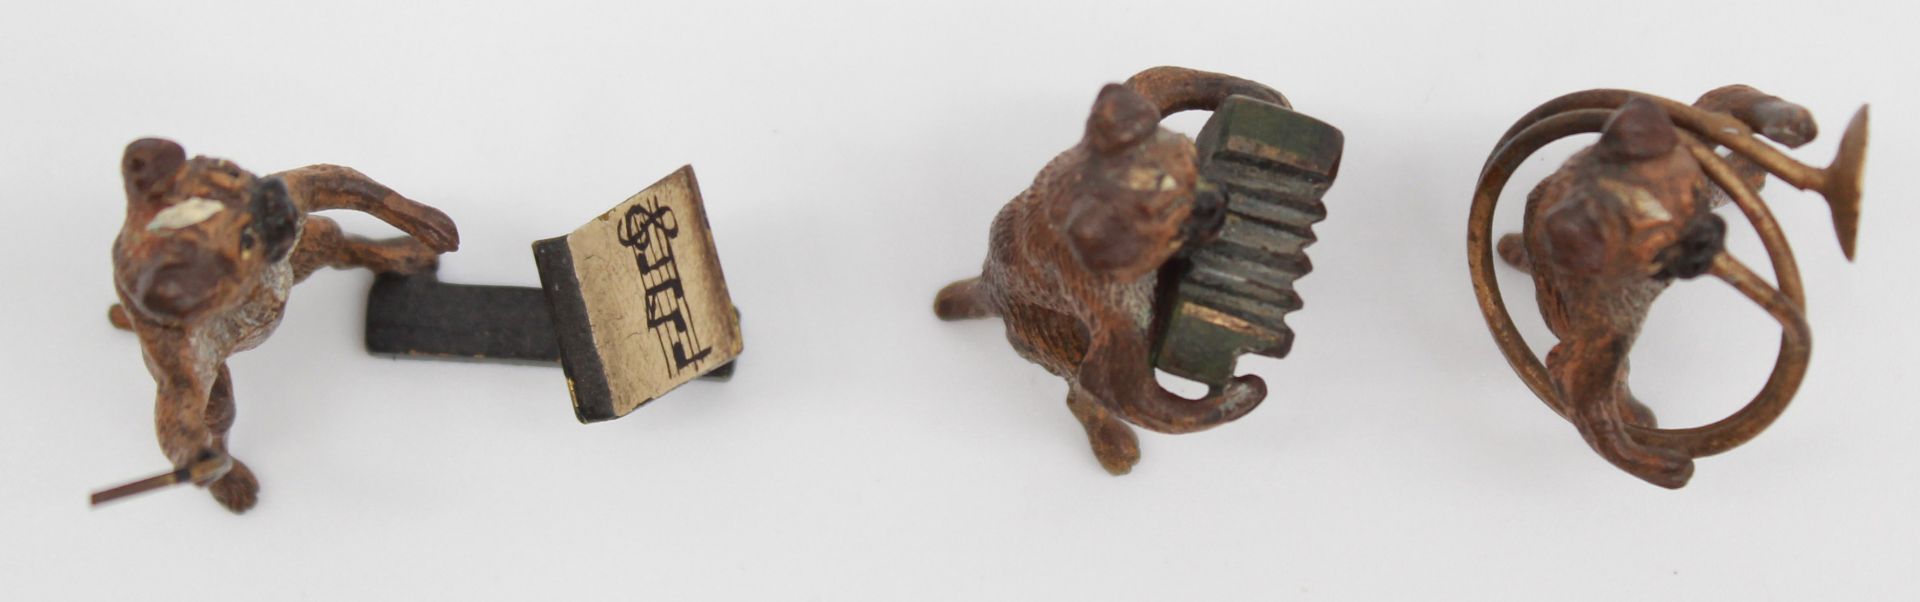 Dog band. 10 small bronzes. Cold painted. Vienna? Up to 4.5 cm high. - Image 20 of 22